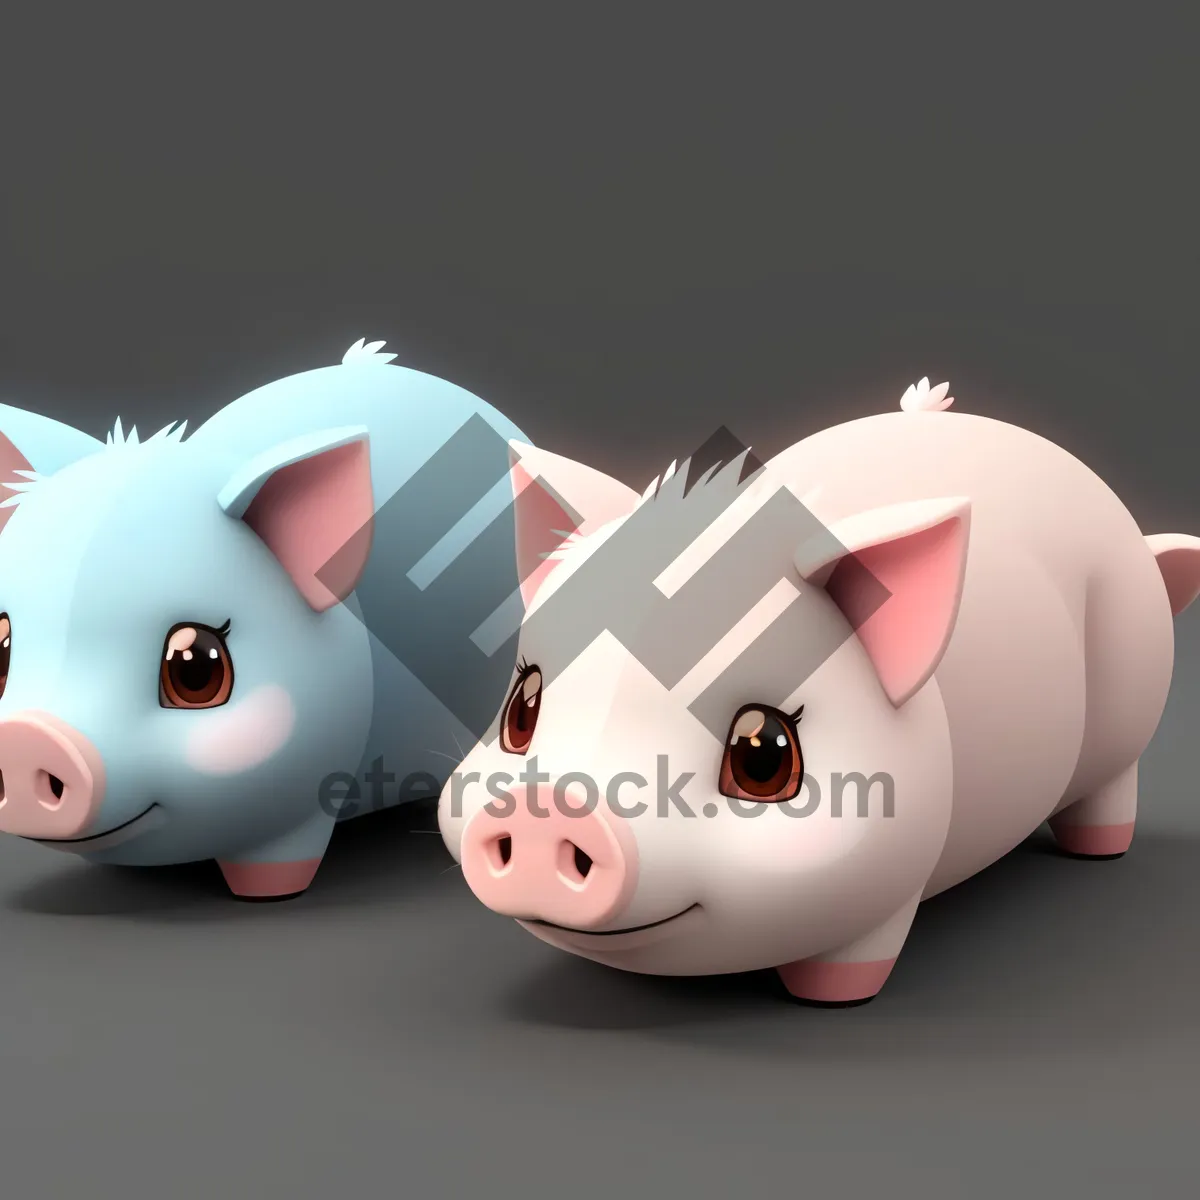 Picture of Pink Piggy Bank - Savings and Wealth Accumulation